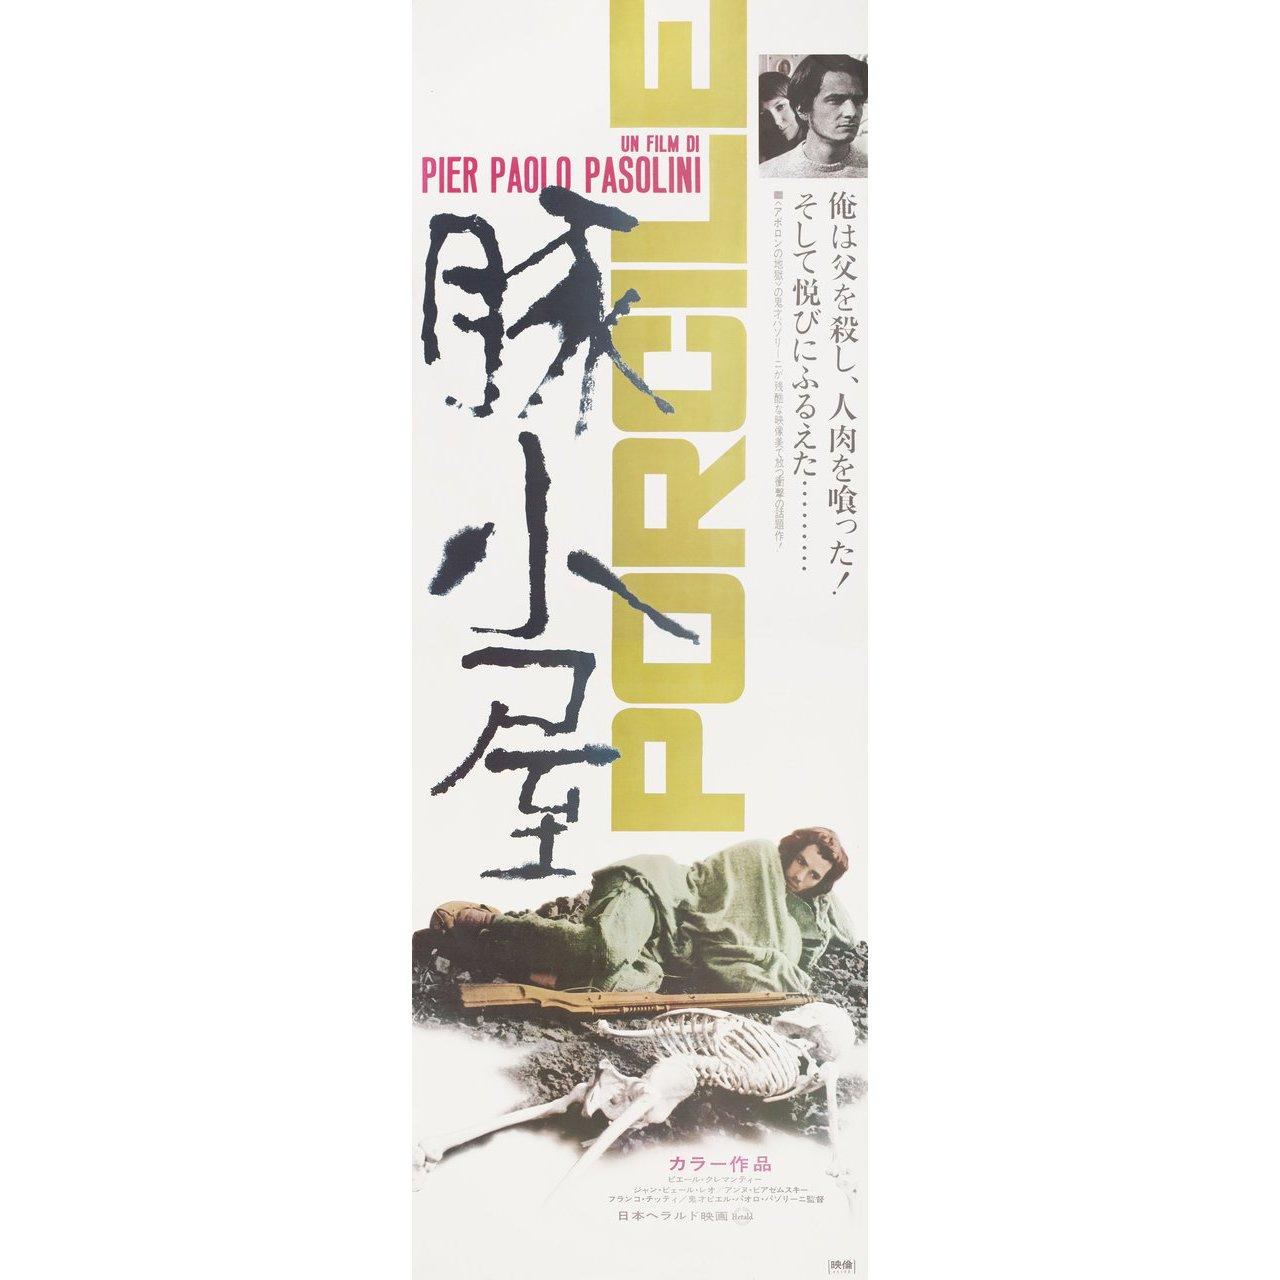 Original 1970 Japanese STB tatekan poster for the film Porcile (Pigpen) directed by Pier Paolo Pasolini with Pierre Clementi / Jean-Pierre Leaud / Alberto Lionello / Ugo Tognazzi. Fine condition, folded. Many original posters were issued folded or